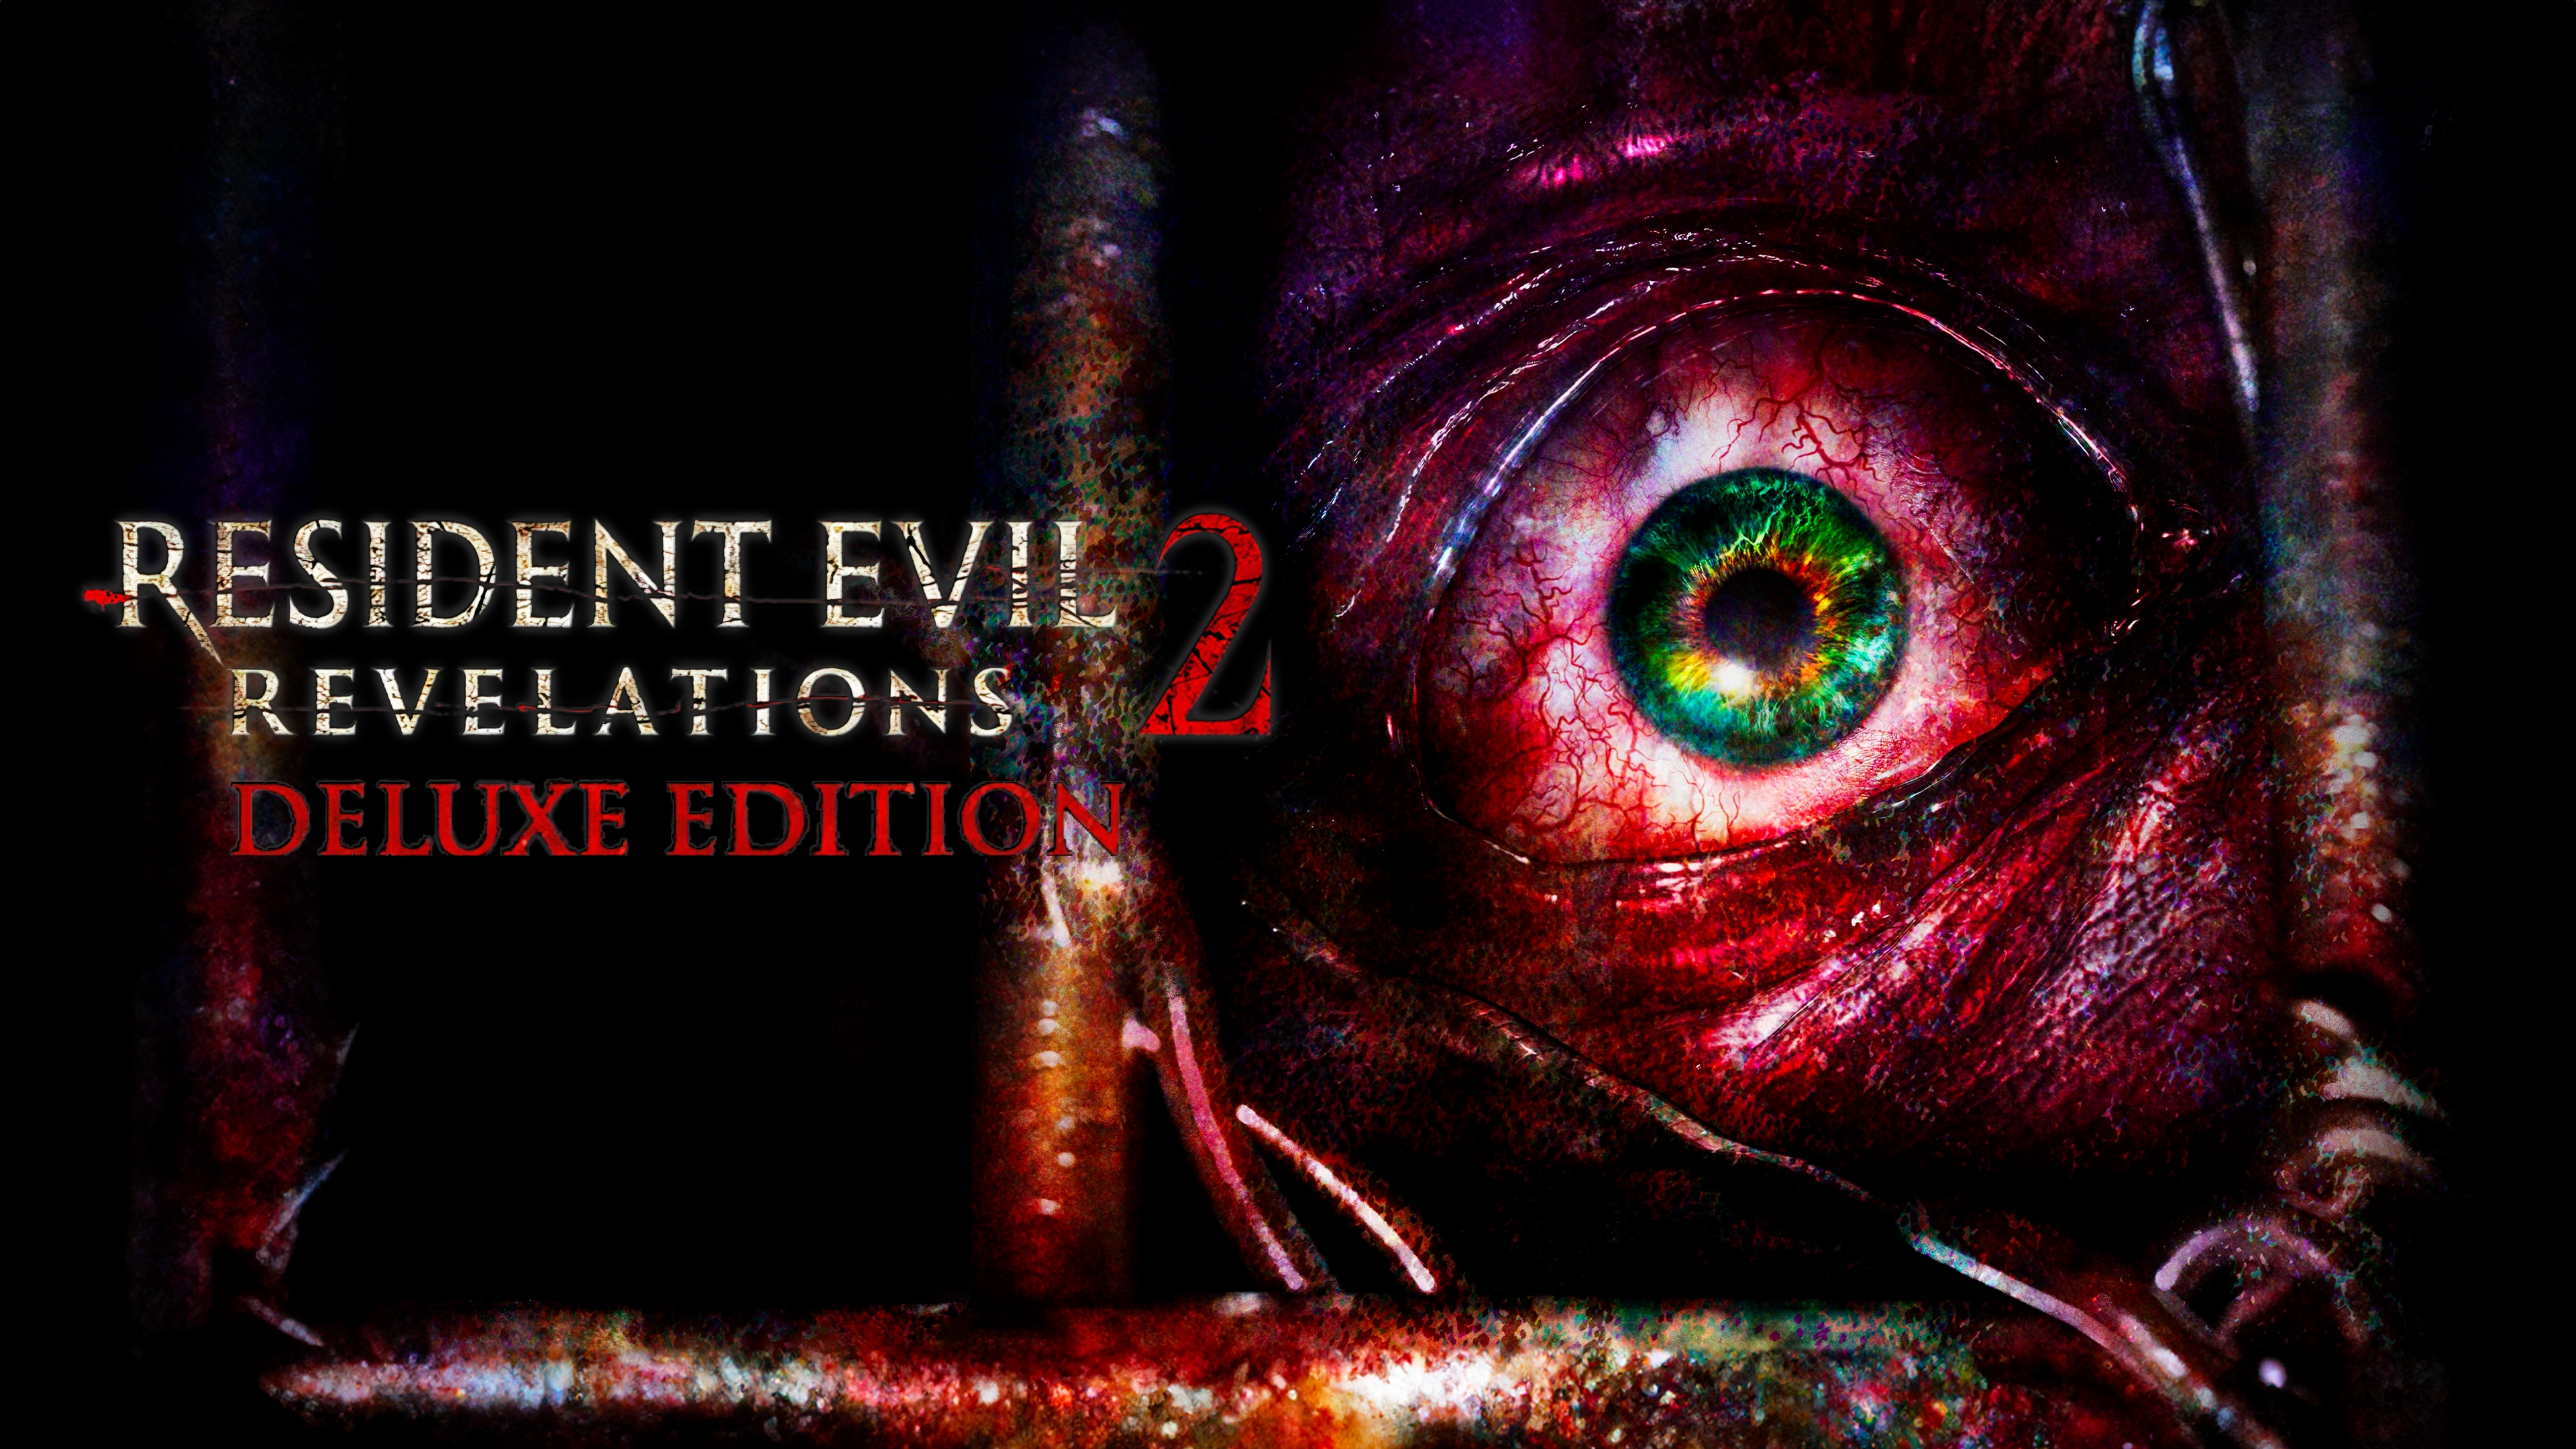 Buy RESIDENT EVIL 2 / BIOHAZARD RE:2 Deluxe Edition from the